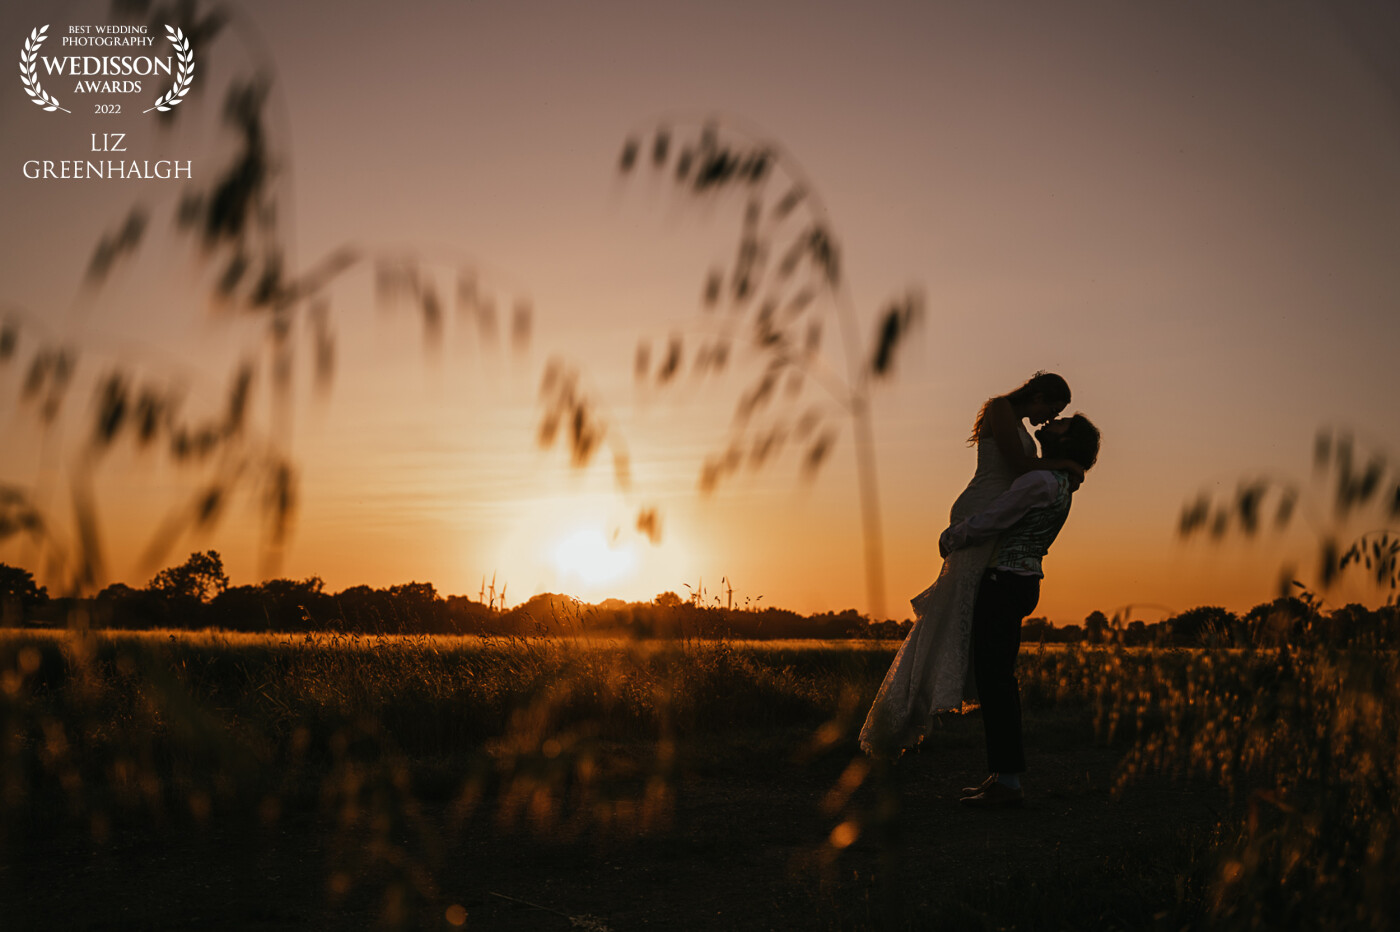 Using the fields at sunset was always on the cards for this farm wedding. Particularly when your parents own the farm and Thatch Barn where the wedding was held